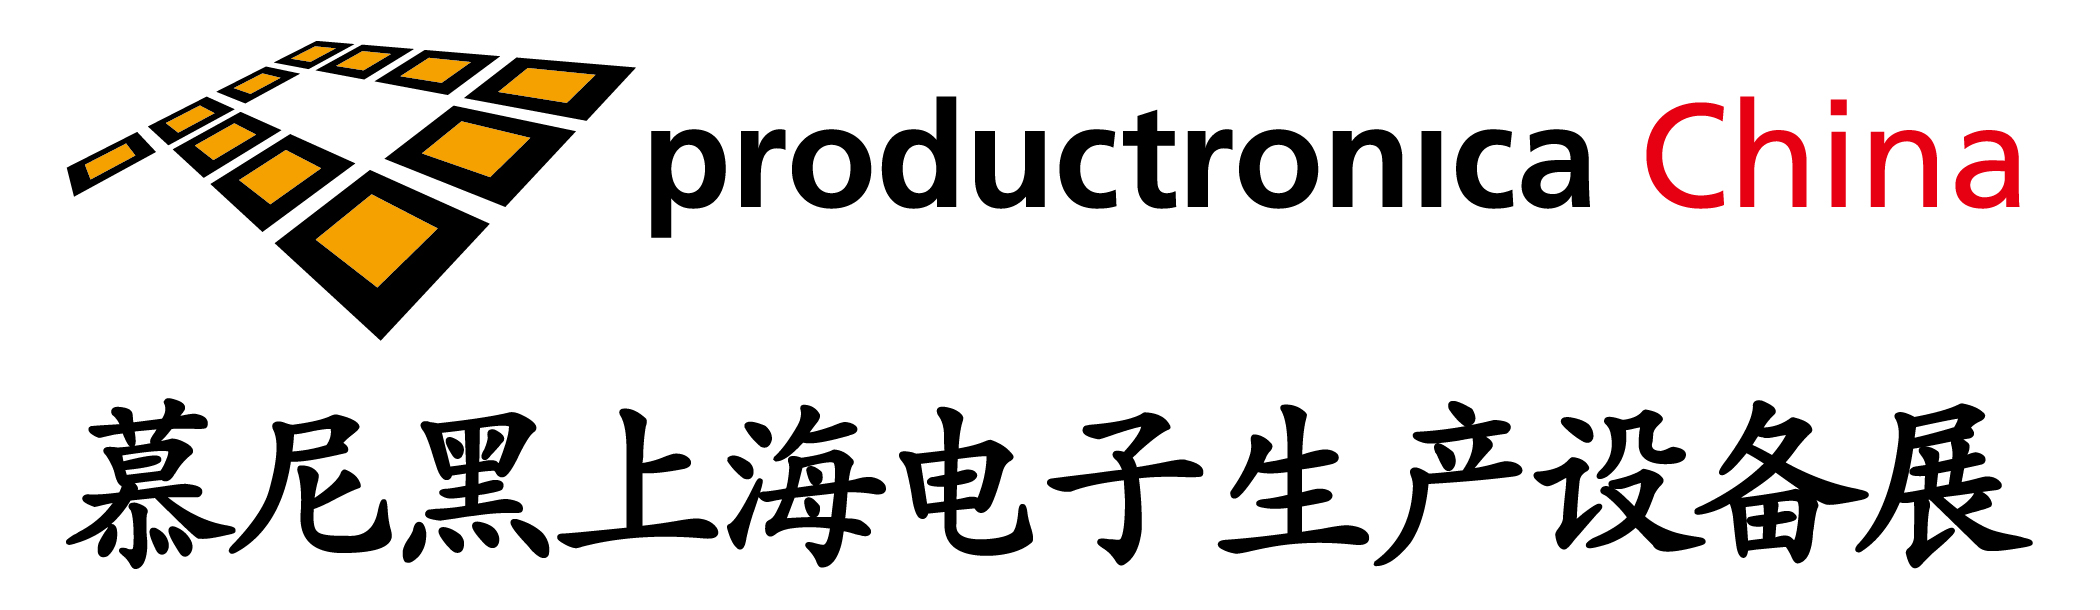 productronica China